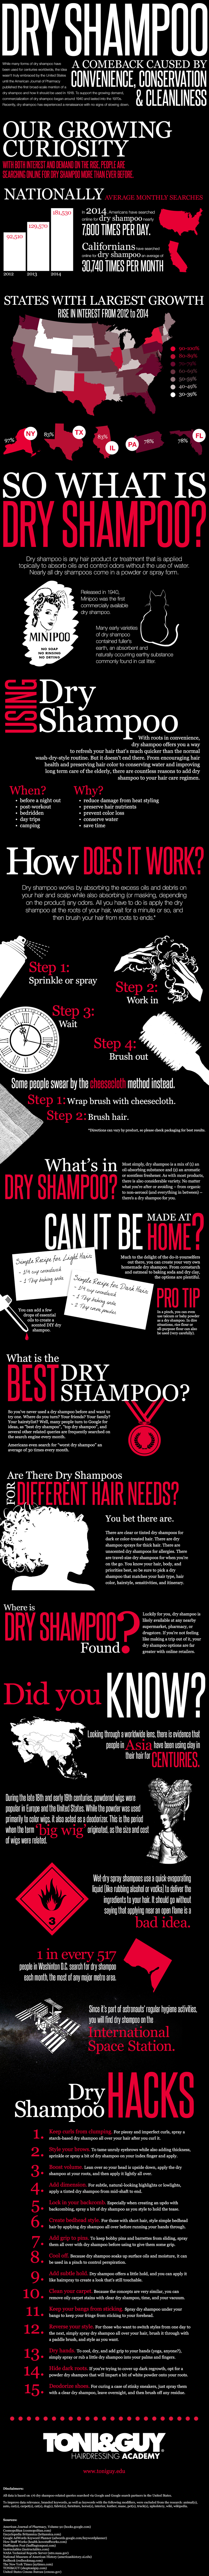 Dry Shampoo Infographic: Everything You Ever Wanted To Know About This Waterless Wonder